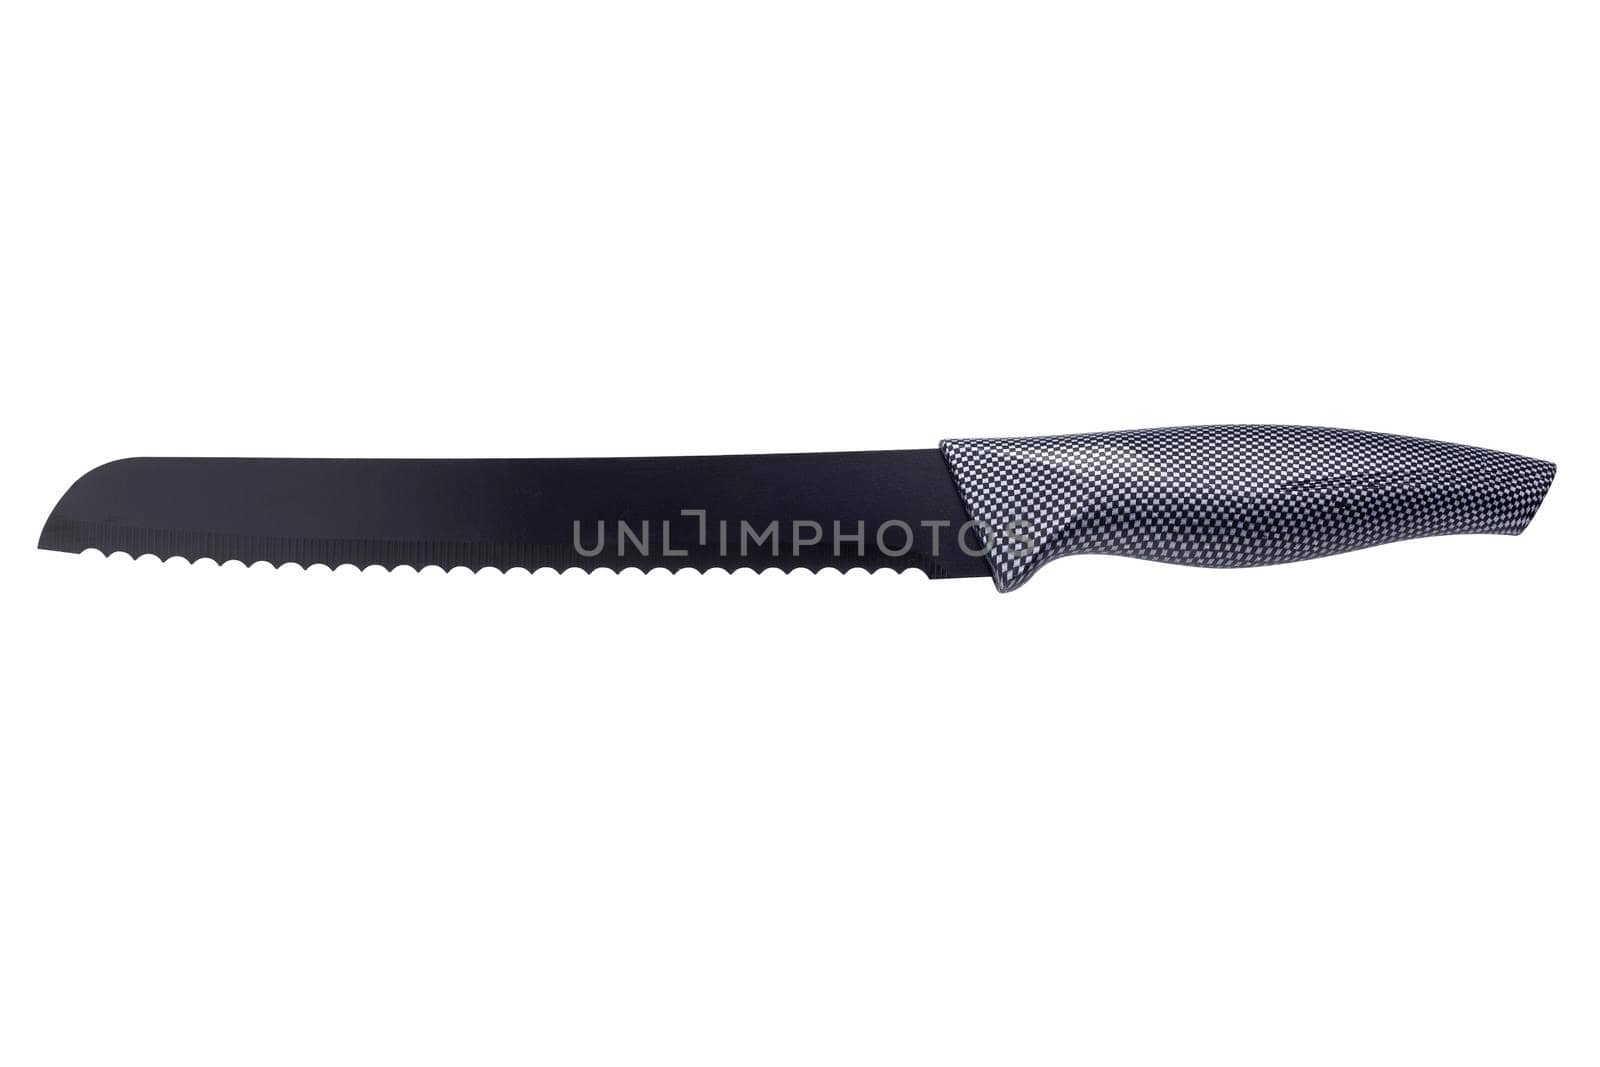 High-quality and durable serrated stainless steel bread knife with black non-stick antibacterial coating, isolated on white with clipping path.
Ideal for professional and semi-professional kitchen workflow.